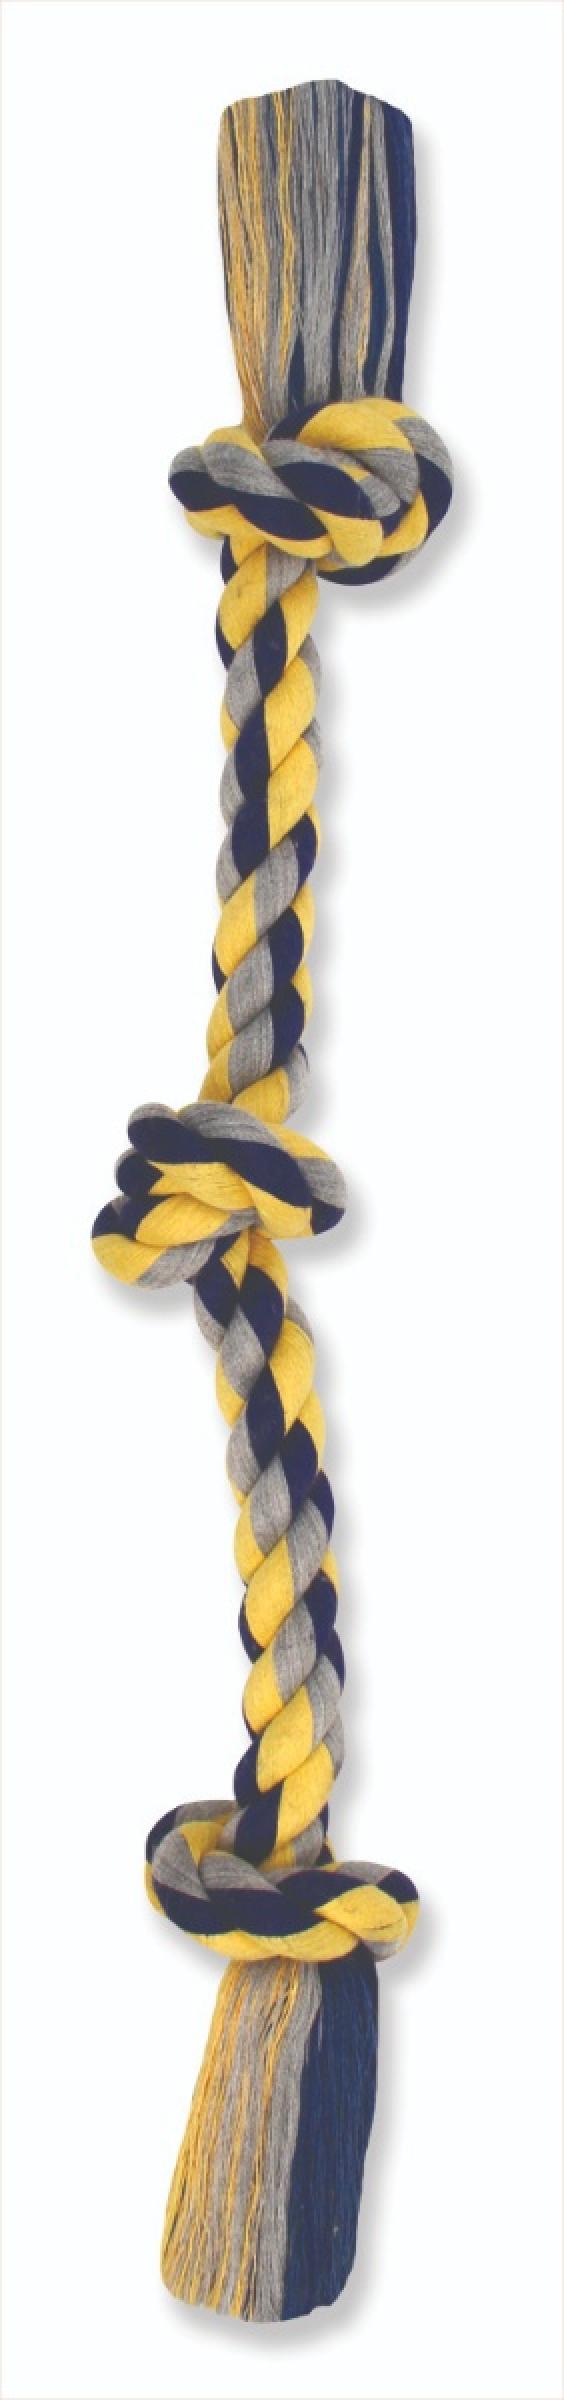 Flossy Chews 3 Knot Tug Rope